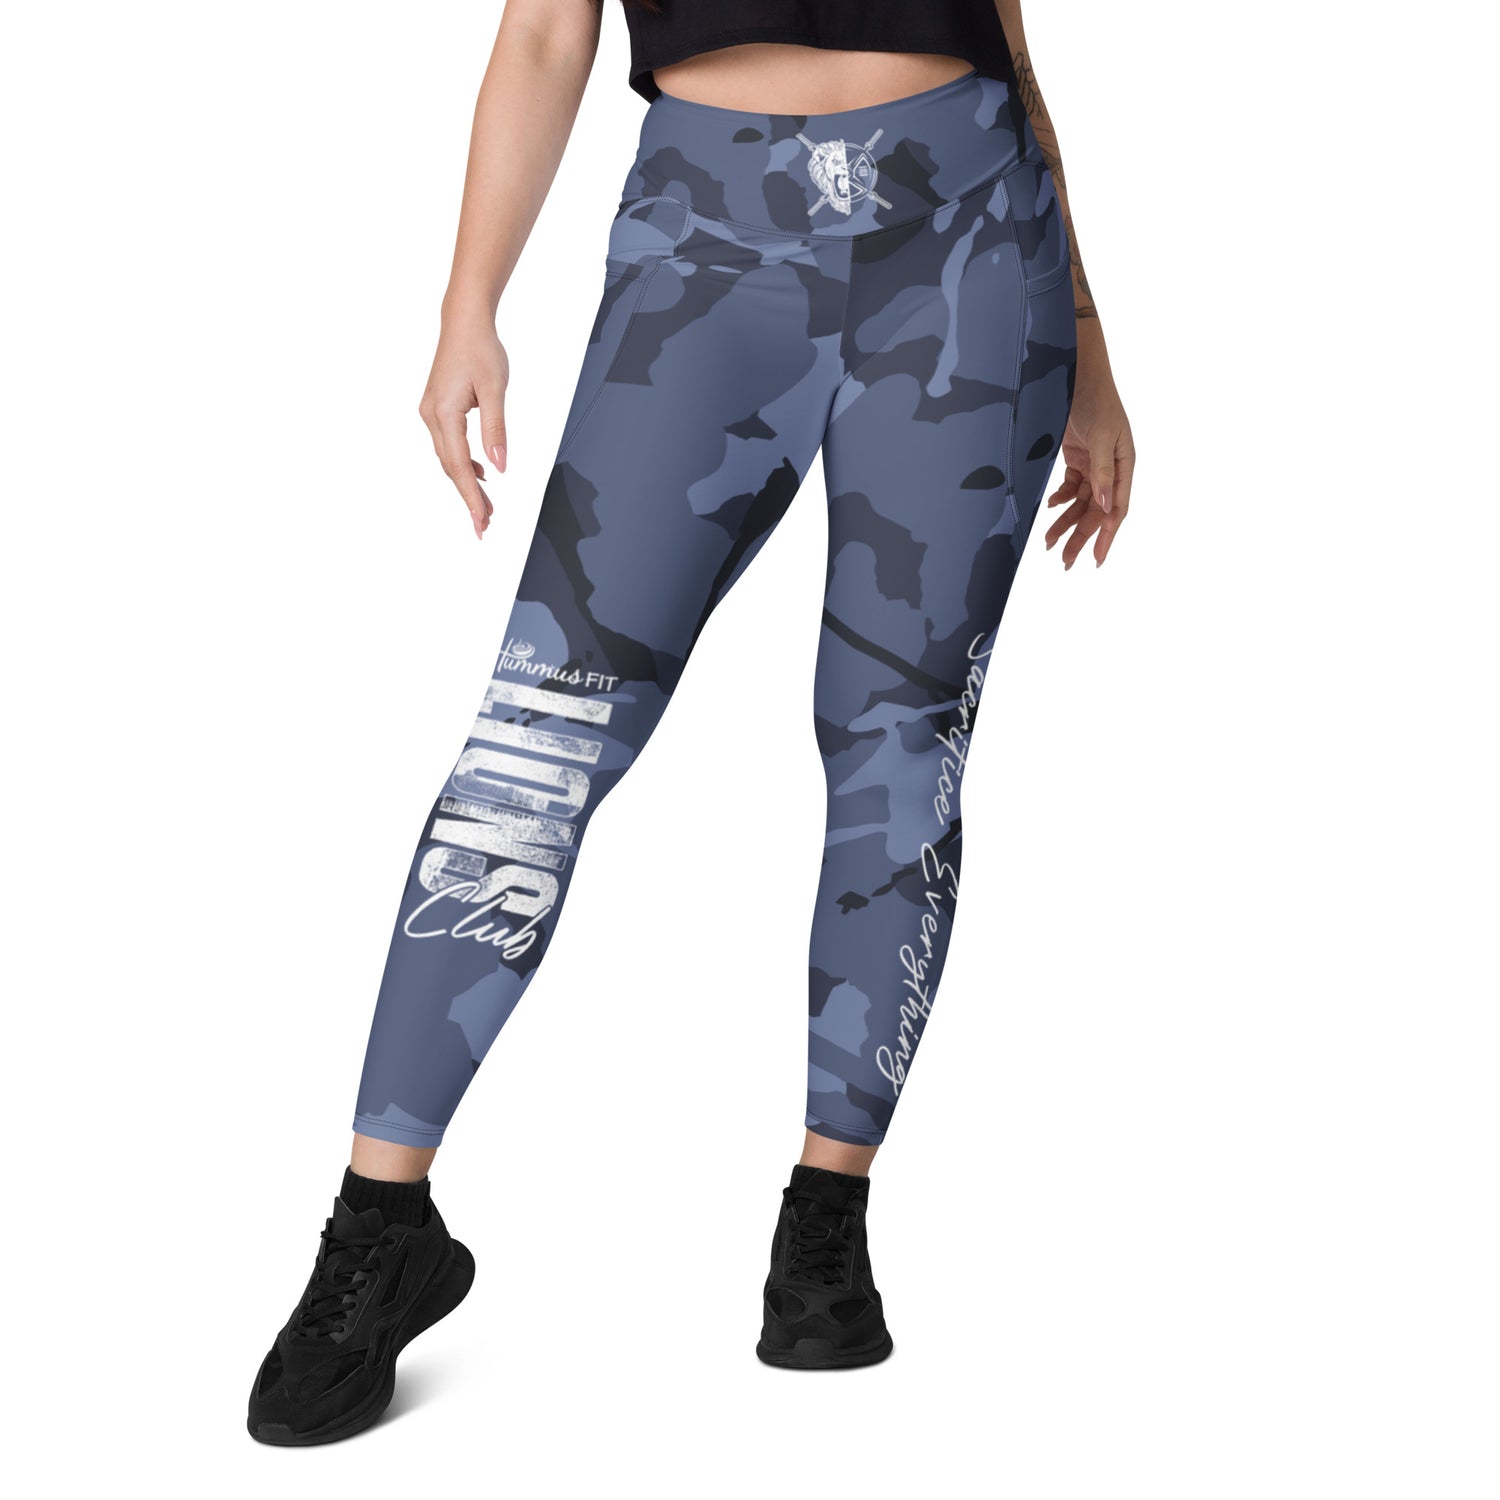 Camouflage sports leggings with pockets - Peach Pump